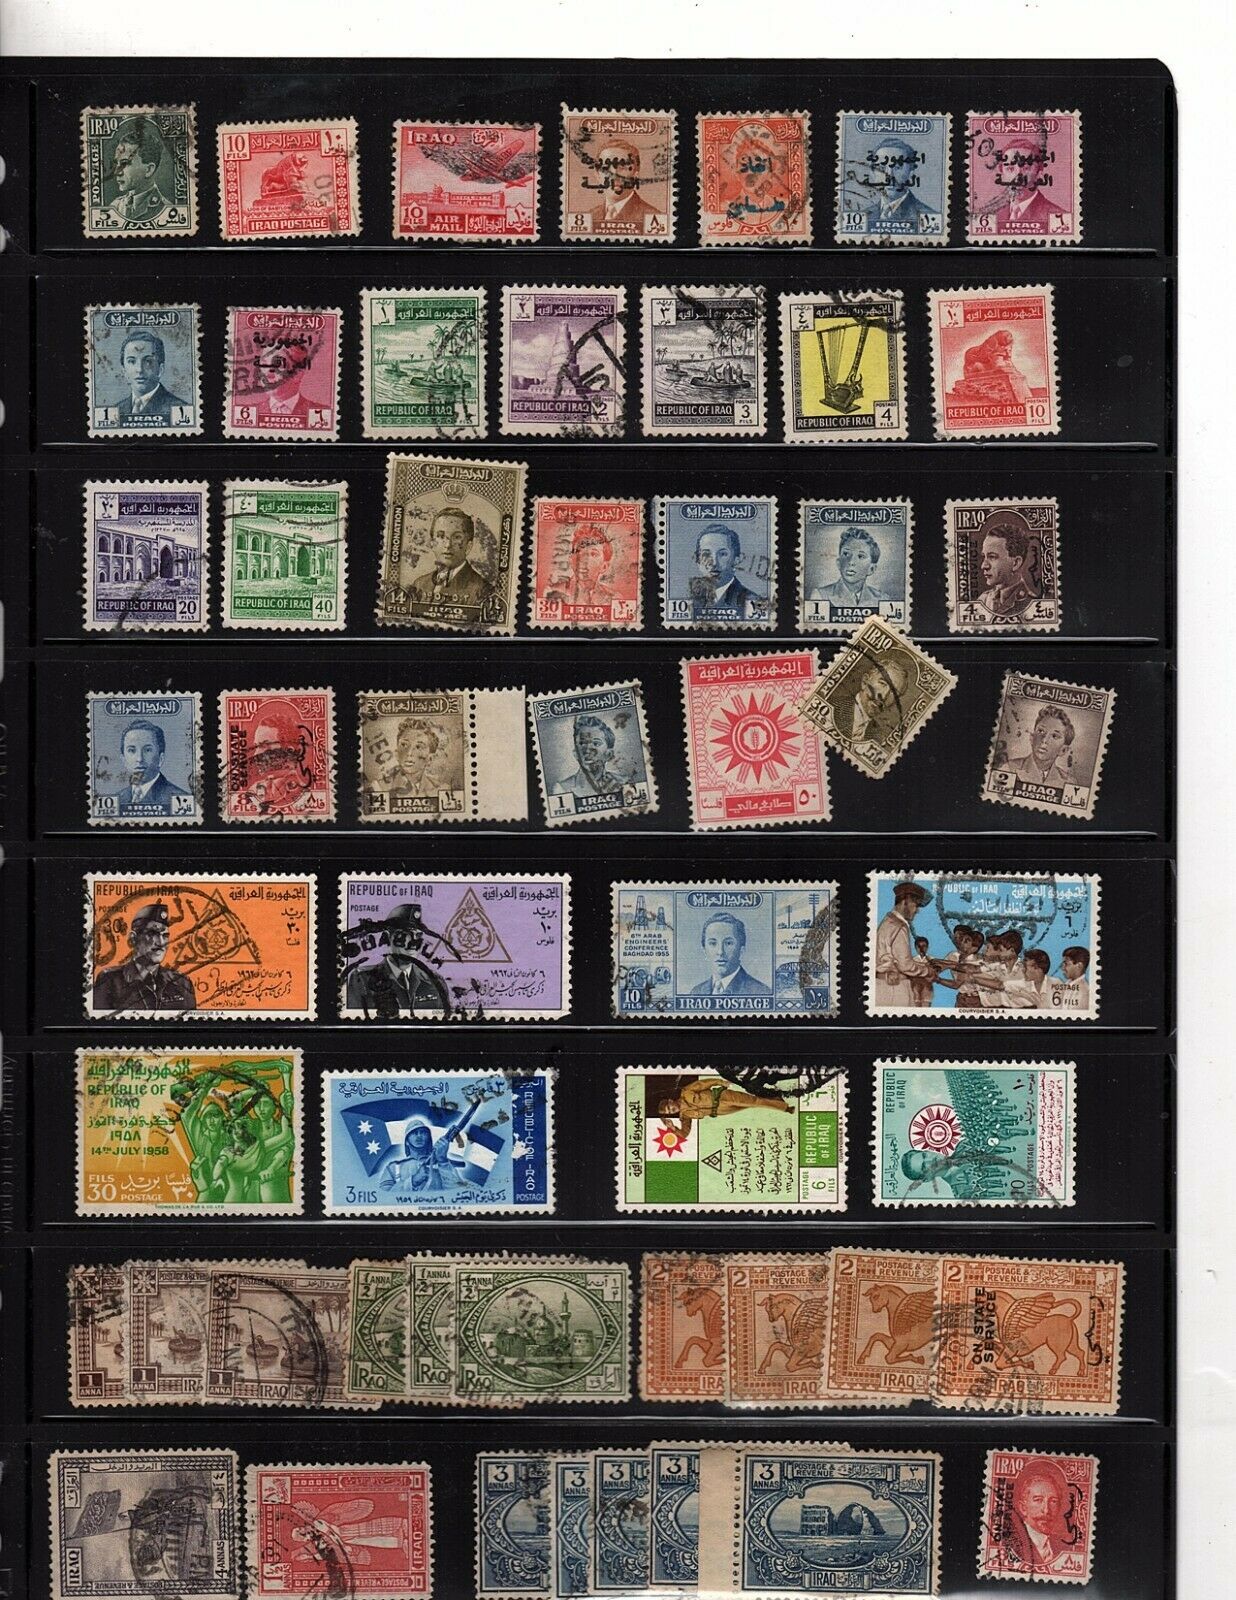 Iraq Iraq Stamp Collection 275 Stamps Dealer Stock (mb20